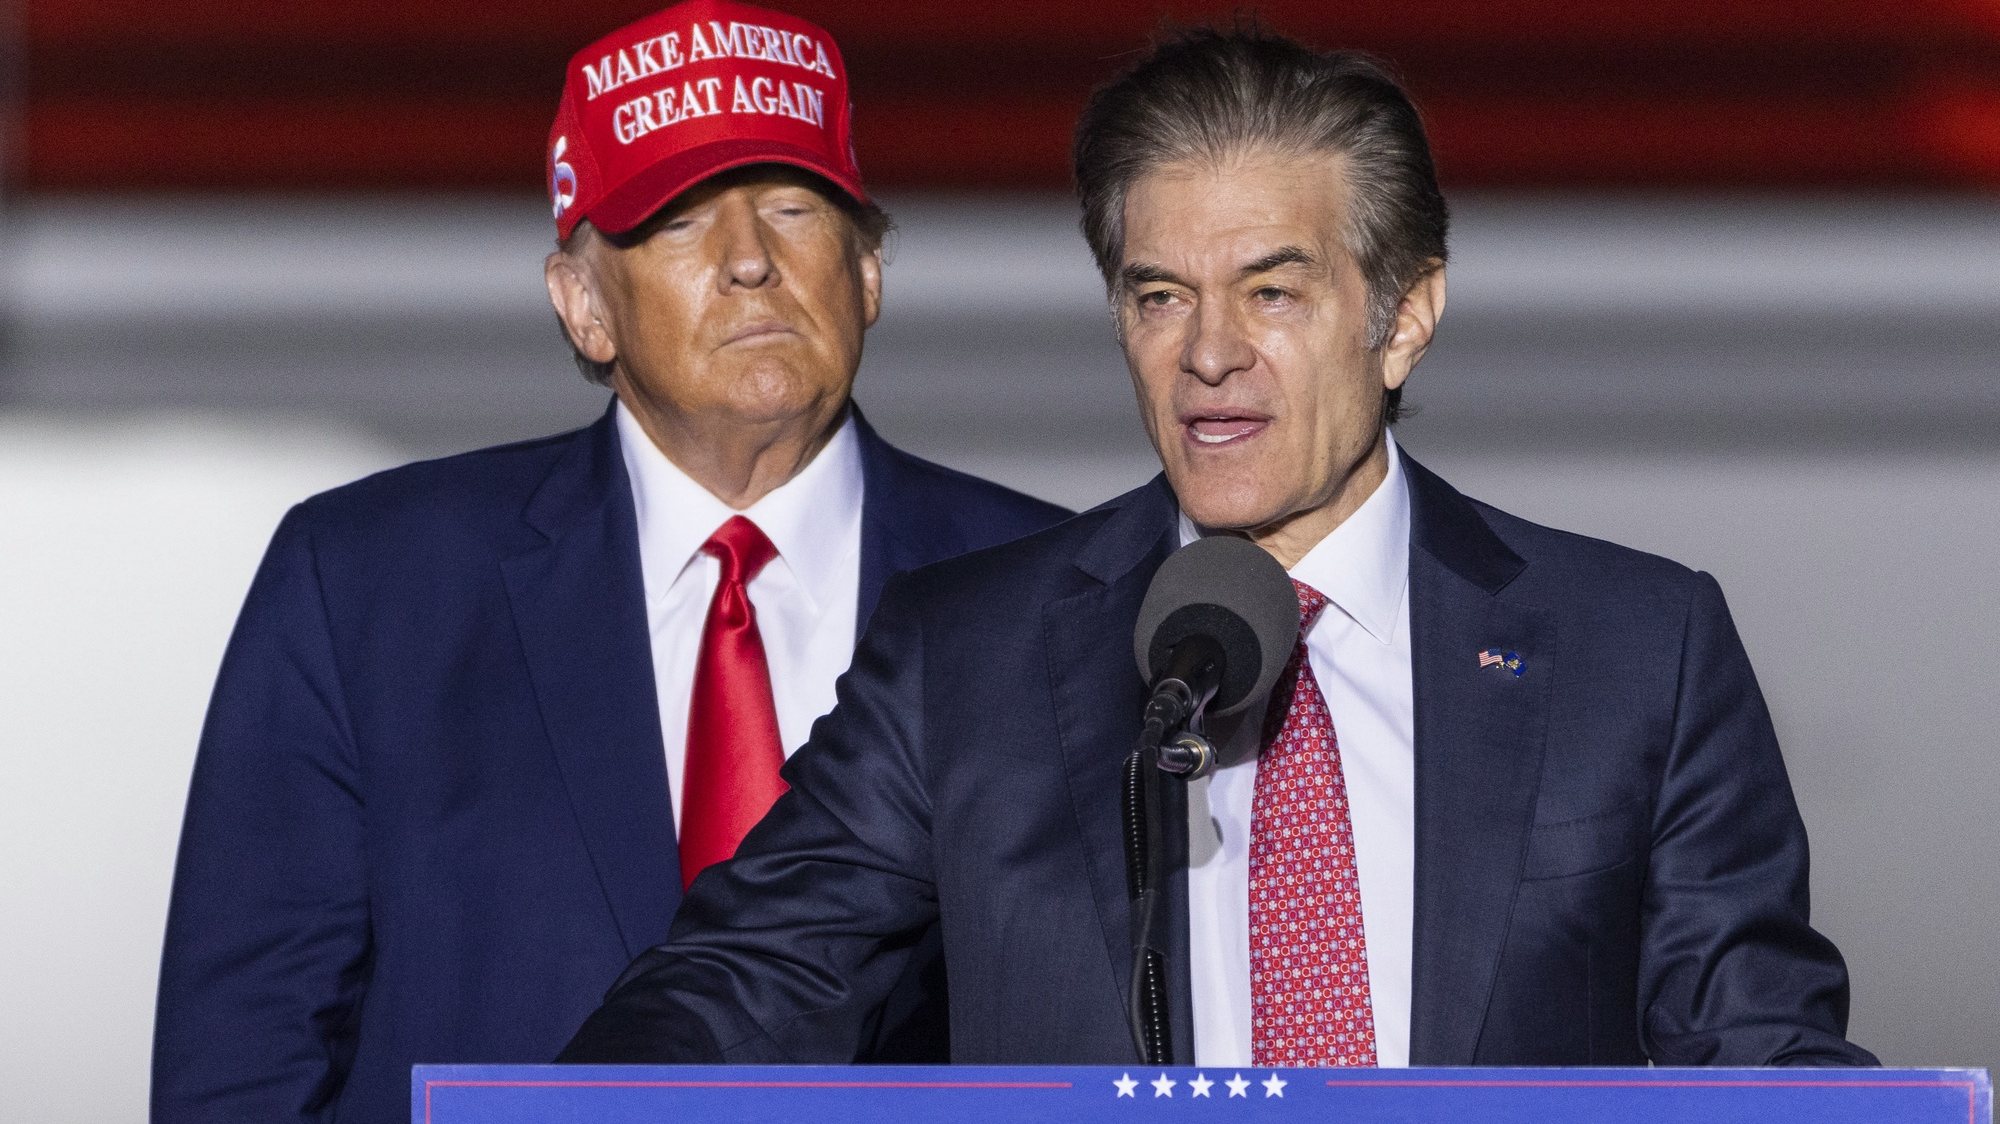 epa10289185 Former President Donald Trump (L) and Republican Senate candidate Mehmet Oz (R) attend a campaign rally in Latrobe, Pennsylvania, USA, 05 November 2022. The US midterm elections are held every four years at the midpoint of each presidential term and this year include elections for all 435 seats in the House of Representatives, 35 of the 100 seats in the Senate and 36 of the 50 state governors as well as numerous other local seats and ballot issues.  EPA/JIM LO SCALZO